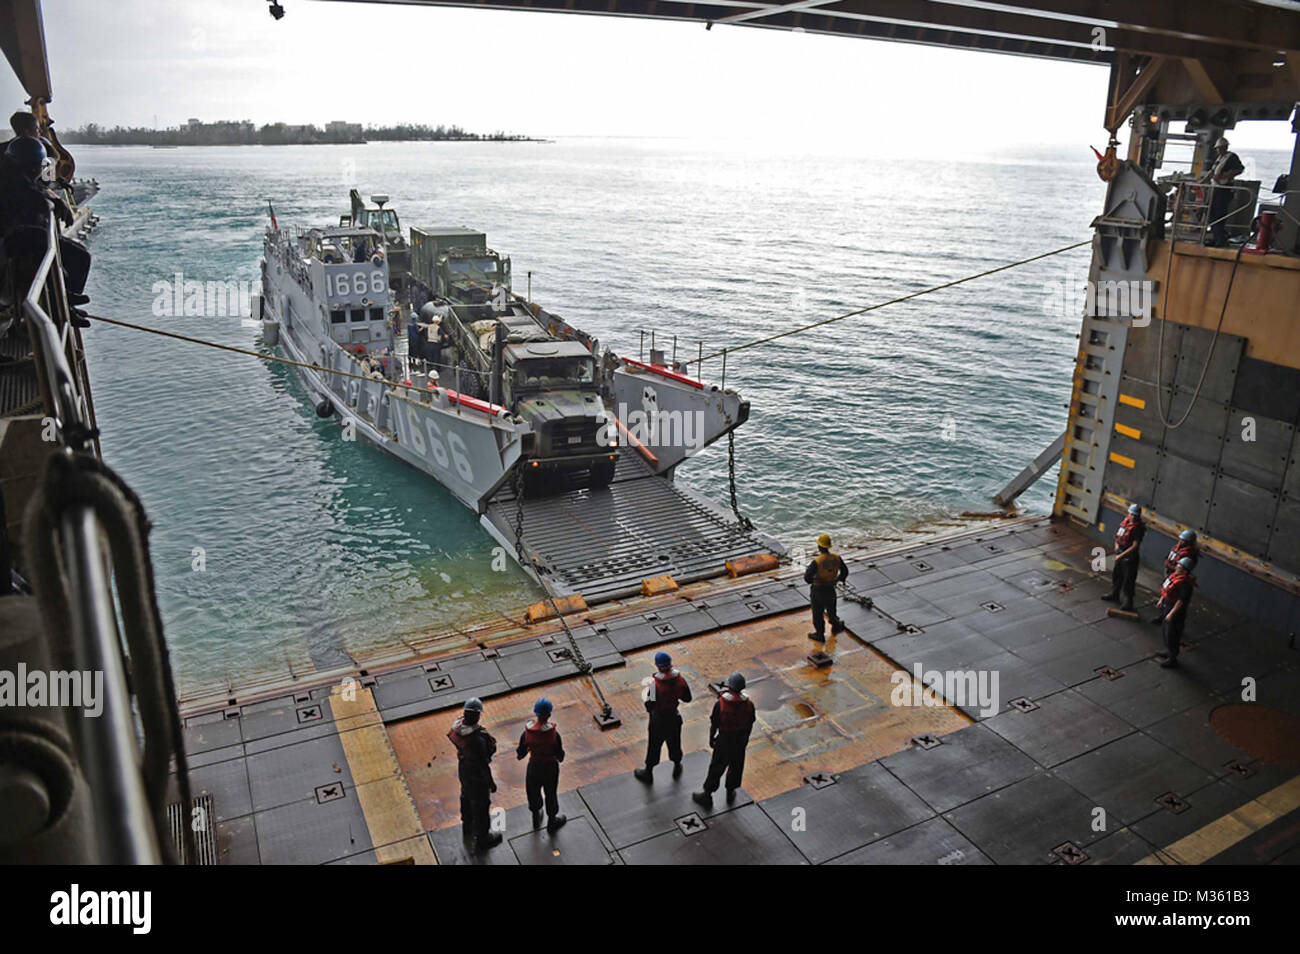 150808-N-KM939-449 SAIPAN HARBOR, Saipan (August 8, 2015) Vehicles from the 31st Marine Expeditionary Unit (MEU) are unloaded from the well deck of the amphibious dock landing ship USS Ashland (LSD 48) via Landing Craft Utility vehicle during disaster relief efforts in Saipan after Typhoon Soudelor made landfall. Ashland is assigned to the Bonhomme Richard Expeditionary Strike Group and is on patrol in the U.S. 7th Fleet area of operations. (U.S. Navy photo by Mass Communications 3rd Class David A. Cox/Released) US Marines Support Disaster Relief Efforts in Saipan by #PACOM Stock Photo